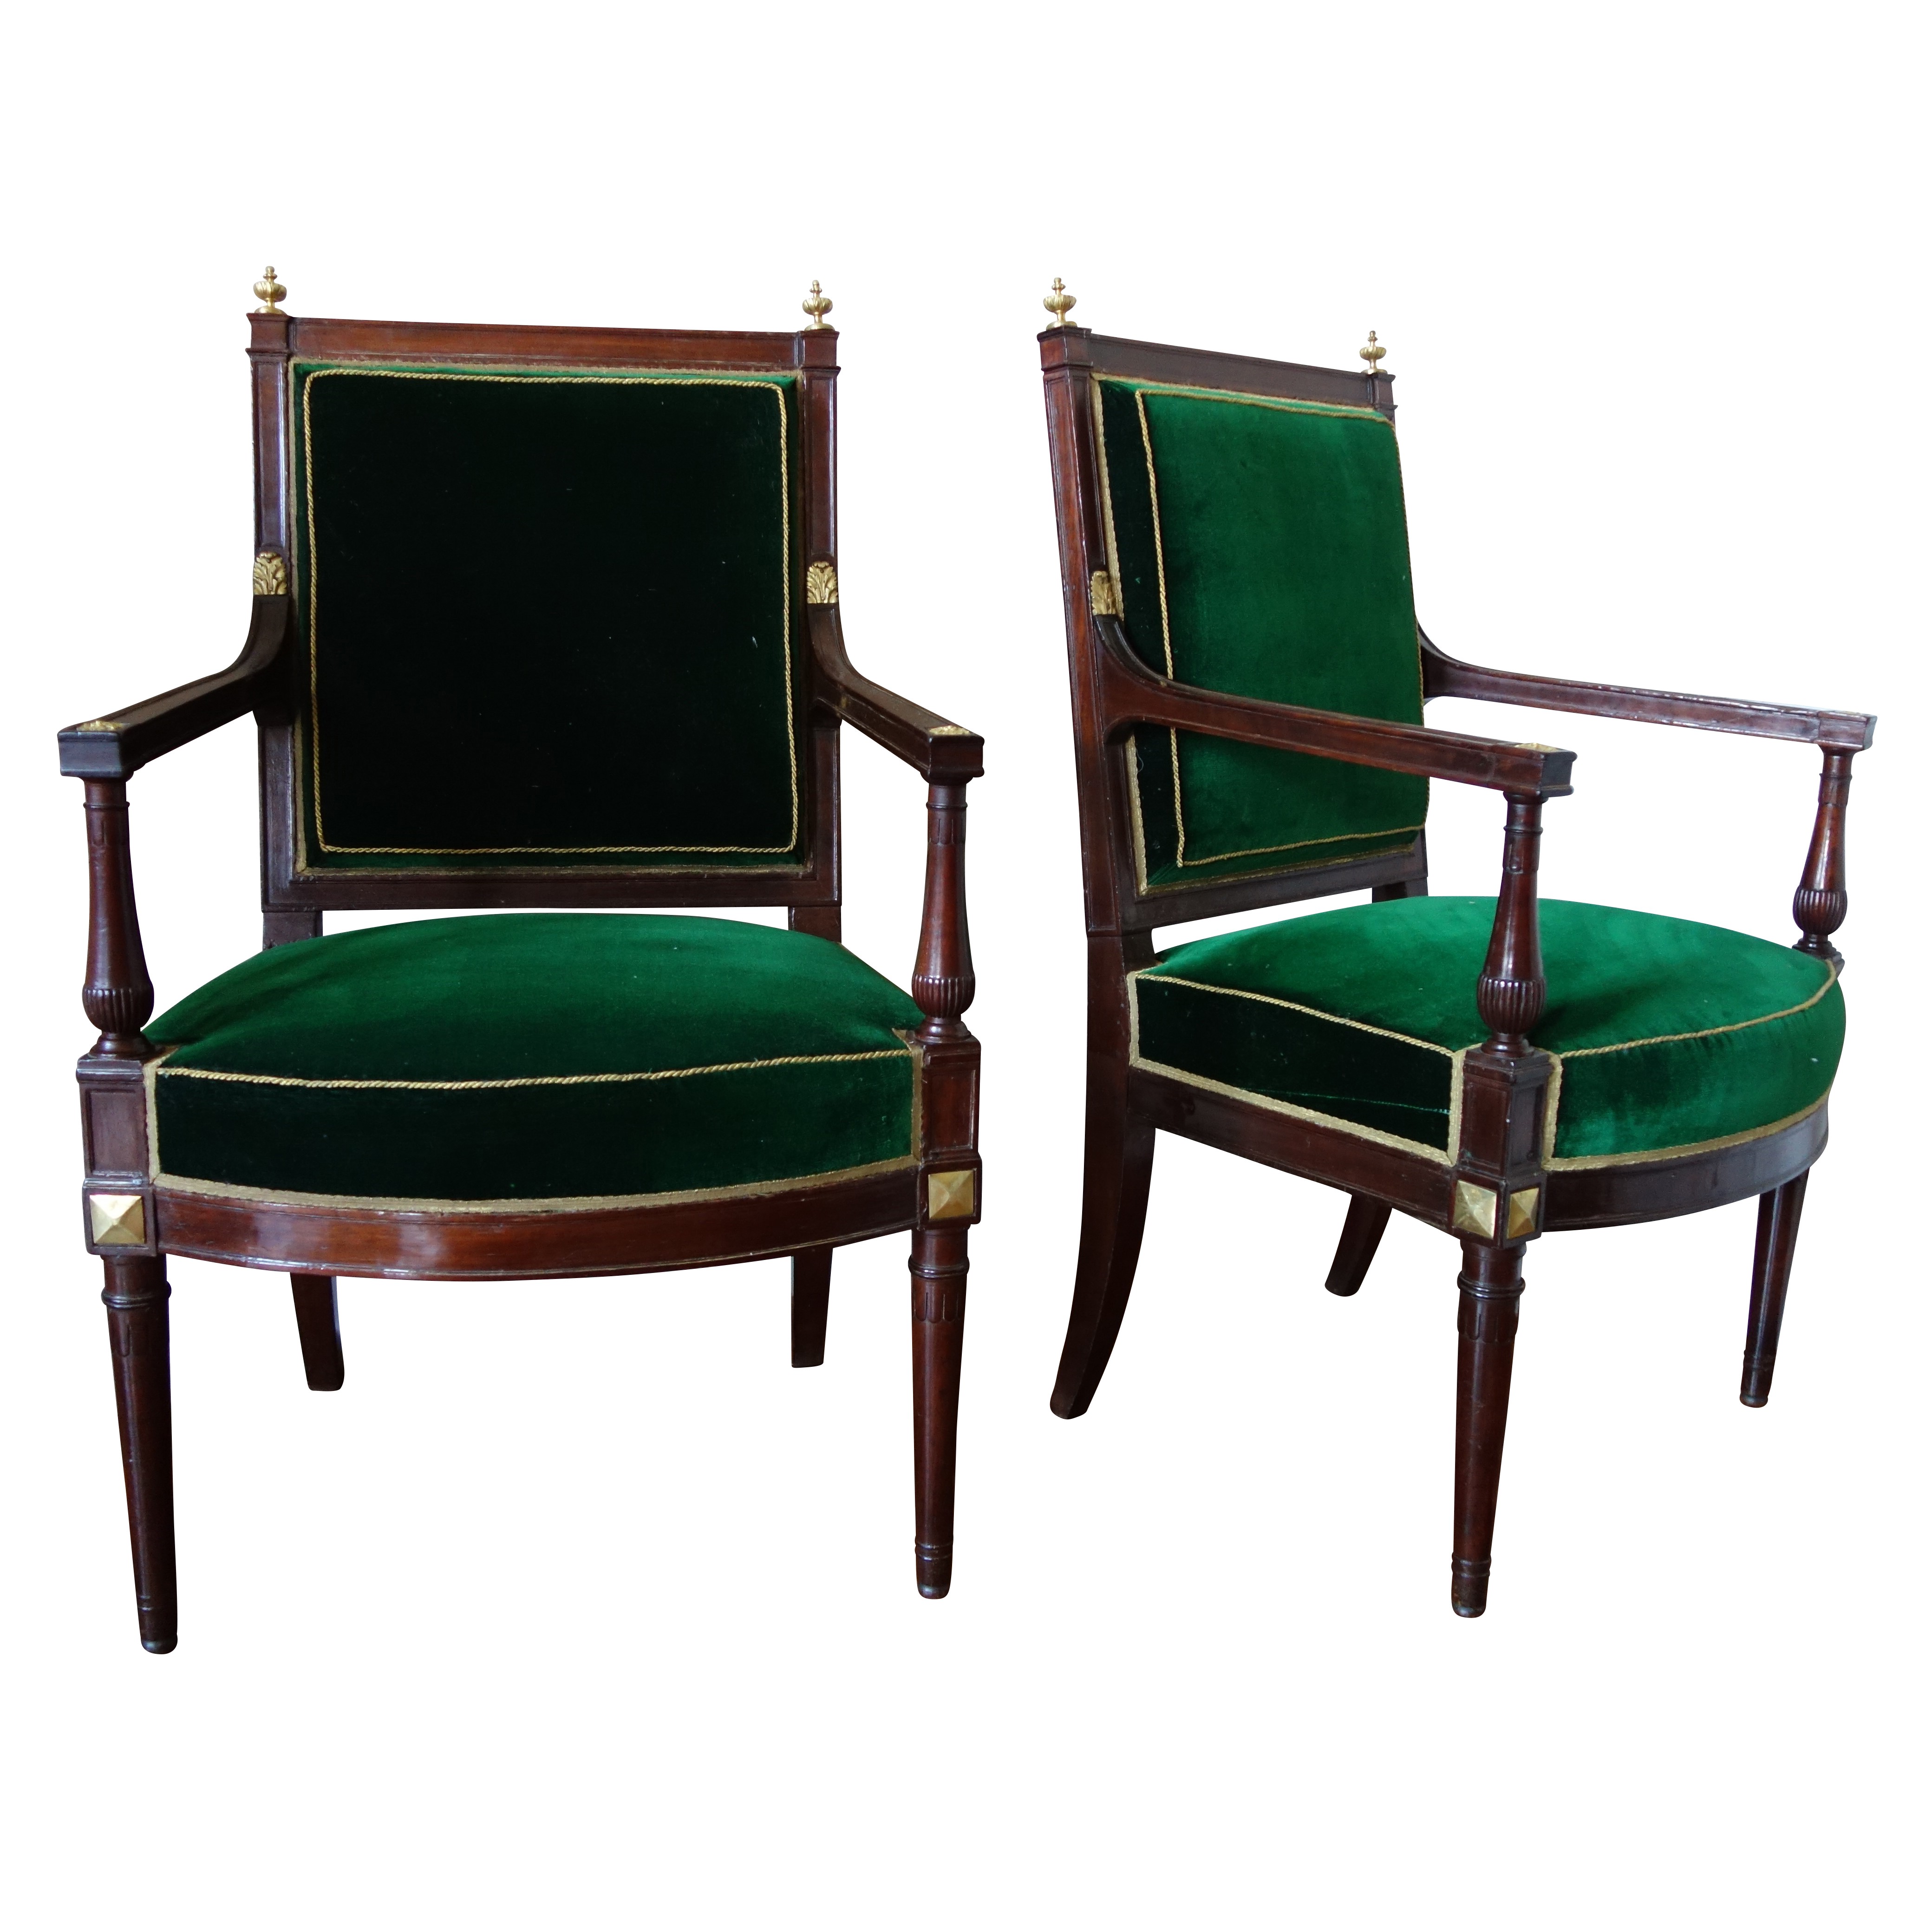 Pair of Directoire mahogany and ormolu armchairs, late 18th century circa 1790 attributed to Jacob